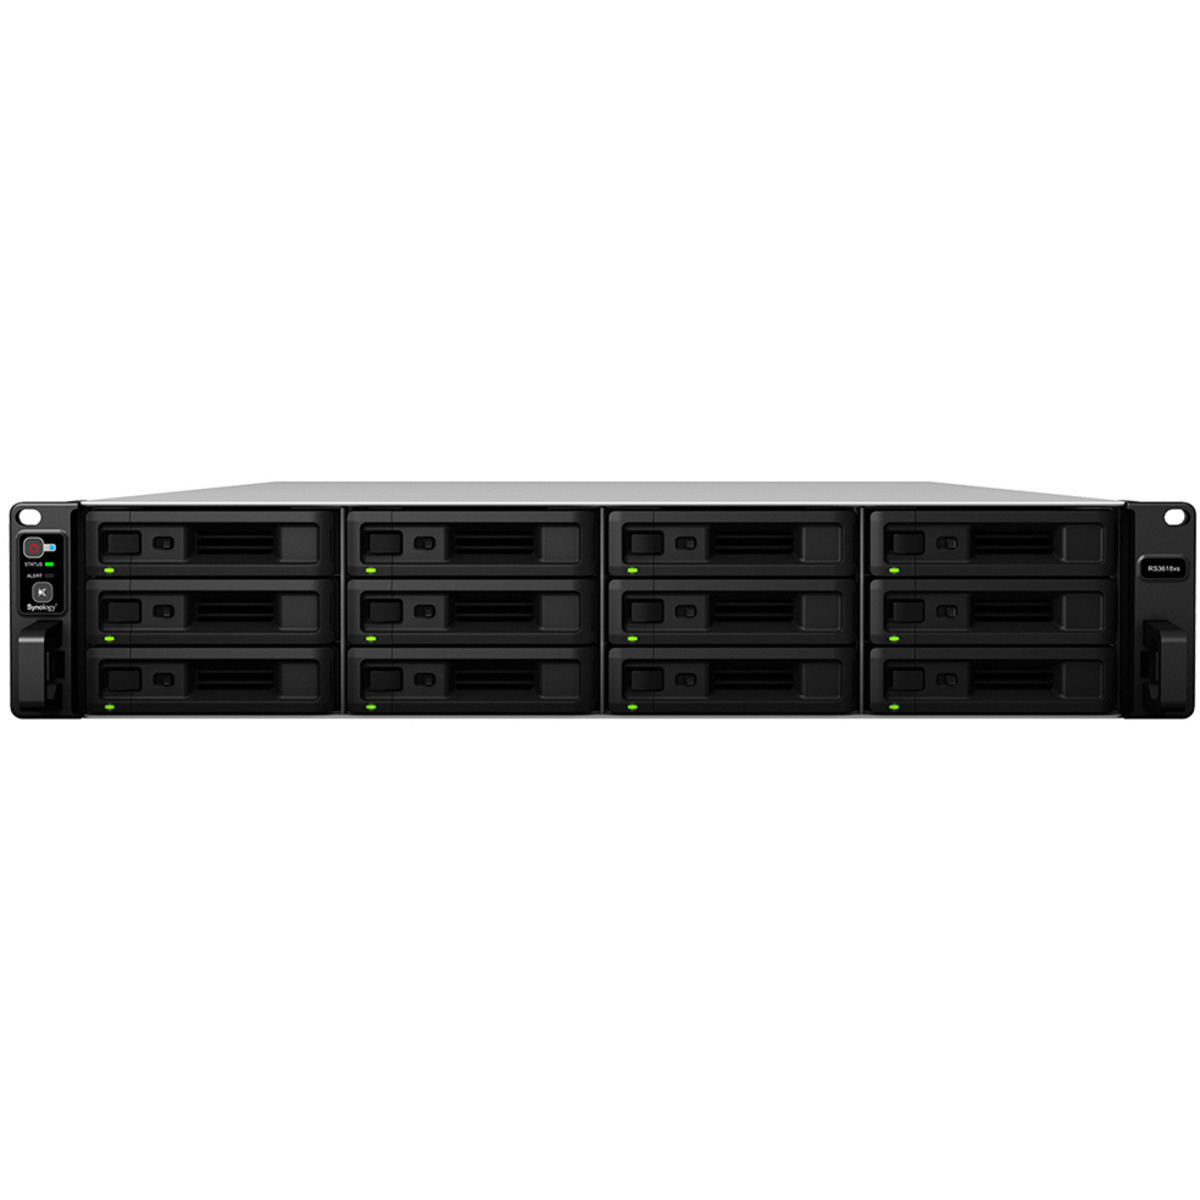 Synology RackStation RS3618xs 16tb 12-Bay RackMount Large Business / Enterprise NAS - Network Attached Storage Device 8x2tb Western Digital Red SA500 WDS200T1R0A 2.5 560/530MB/s SATA 6Gb/s SSD NAS Class Drives Installed - Burn-In Tested RackStation RS3618xs